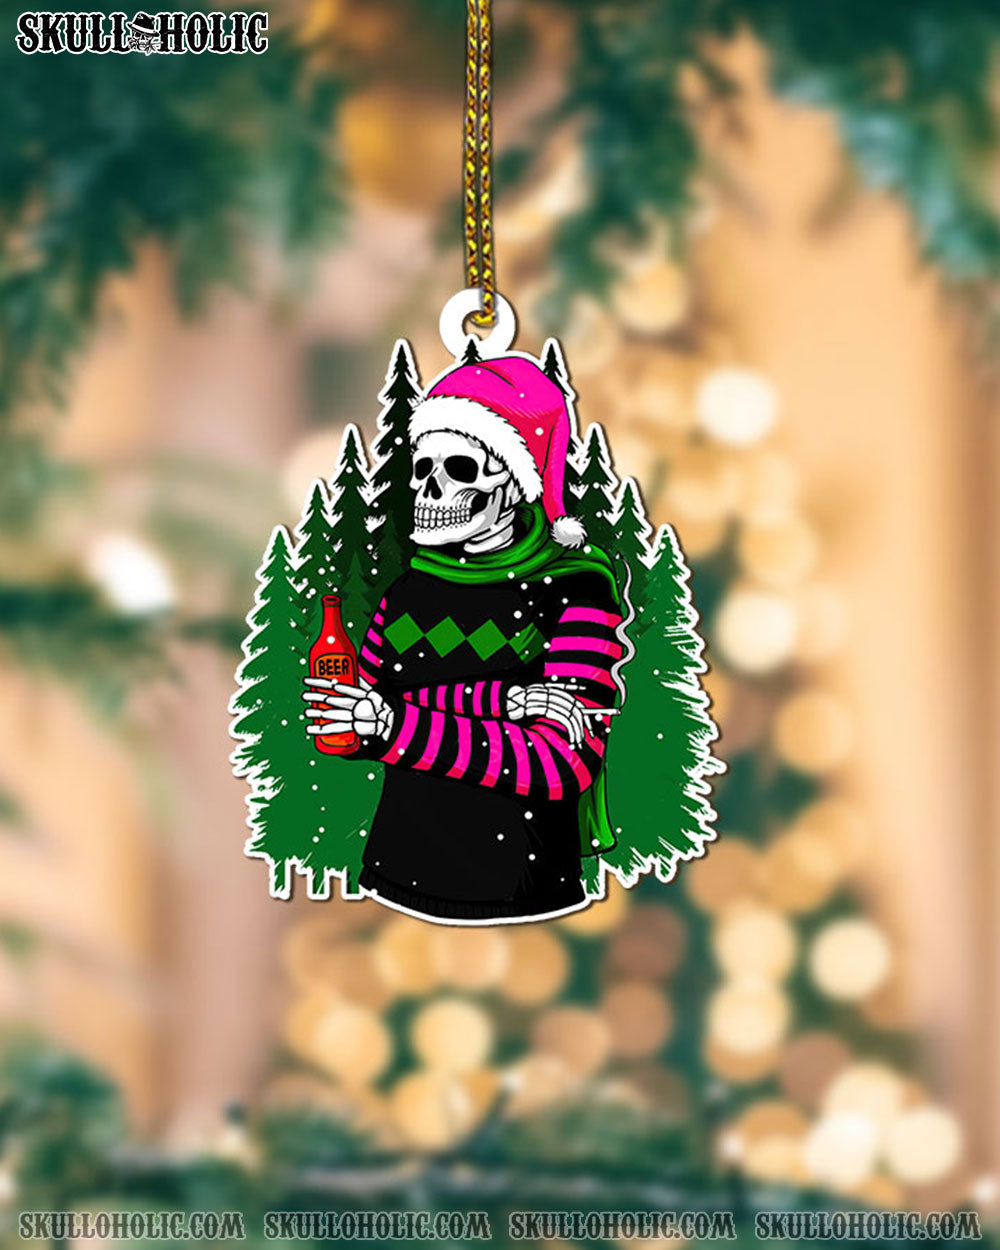 SKELETON CHRISTMAS DRINK DOUBLE WOOD ORNAMENT - TLTW2311225